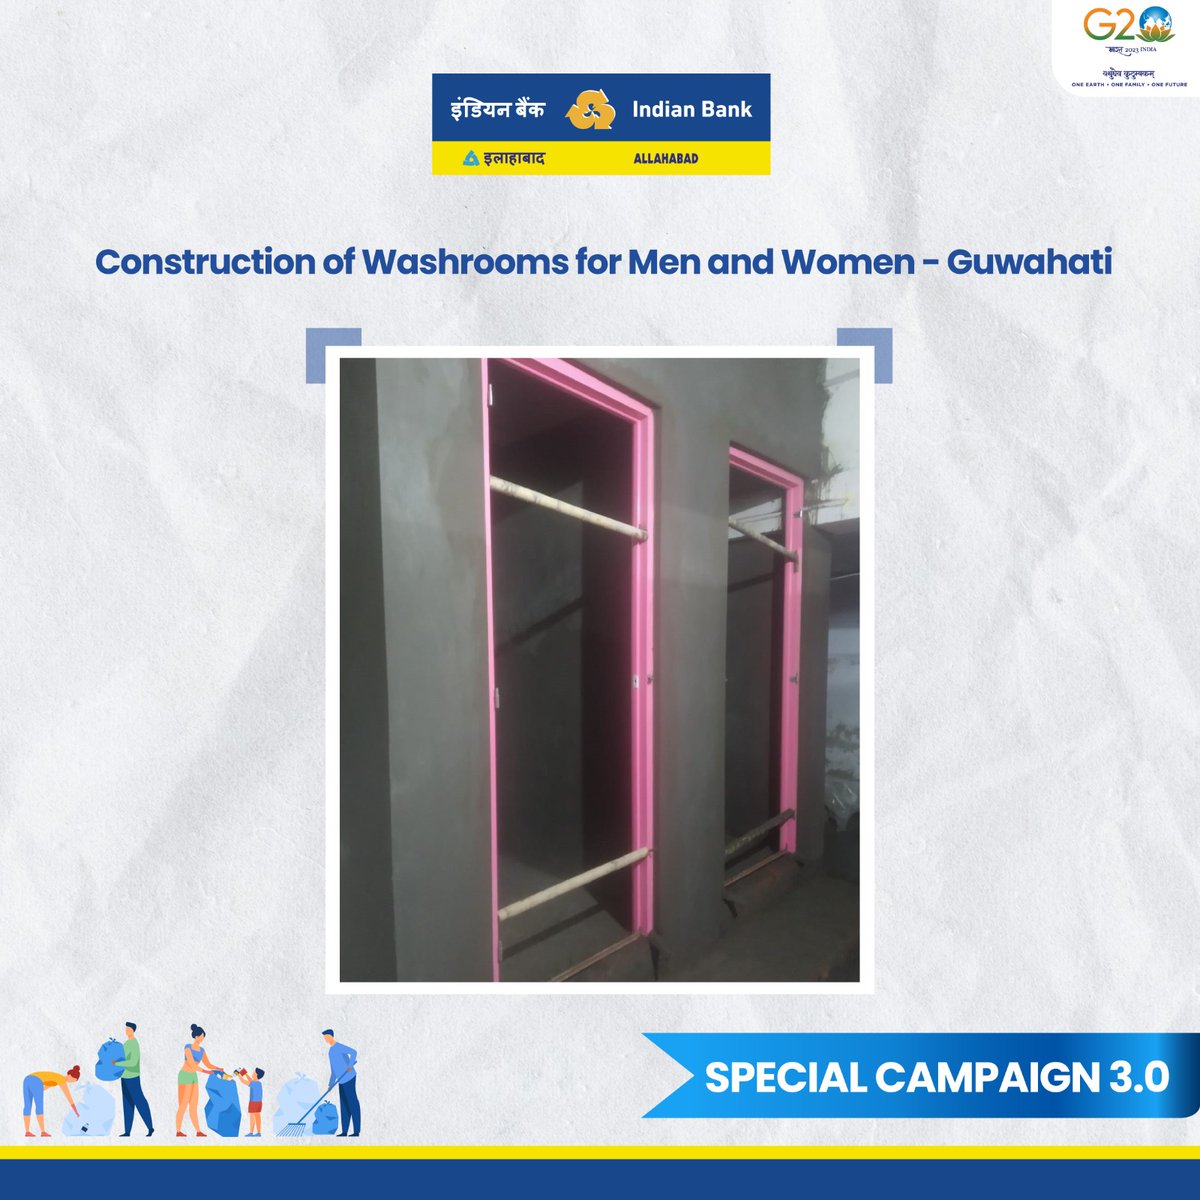 Under #SpecialCampaign3.0, separate washrooms were made available for the Bank’s customers. 
#GarbageFreeIndia #SwachhBharat 
@DARPG_GoI @DFS_India @PMOIndia